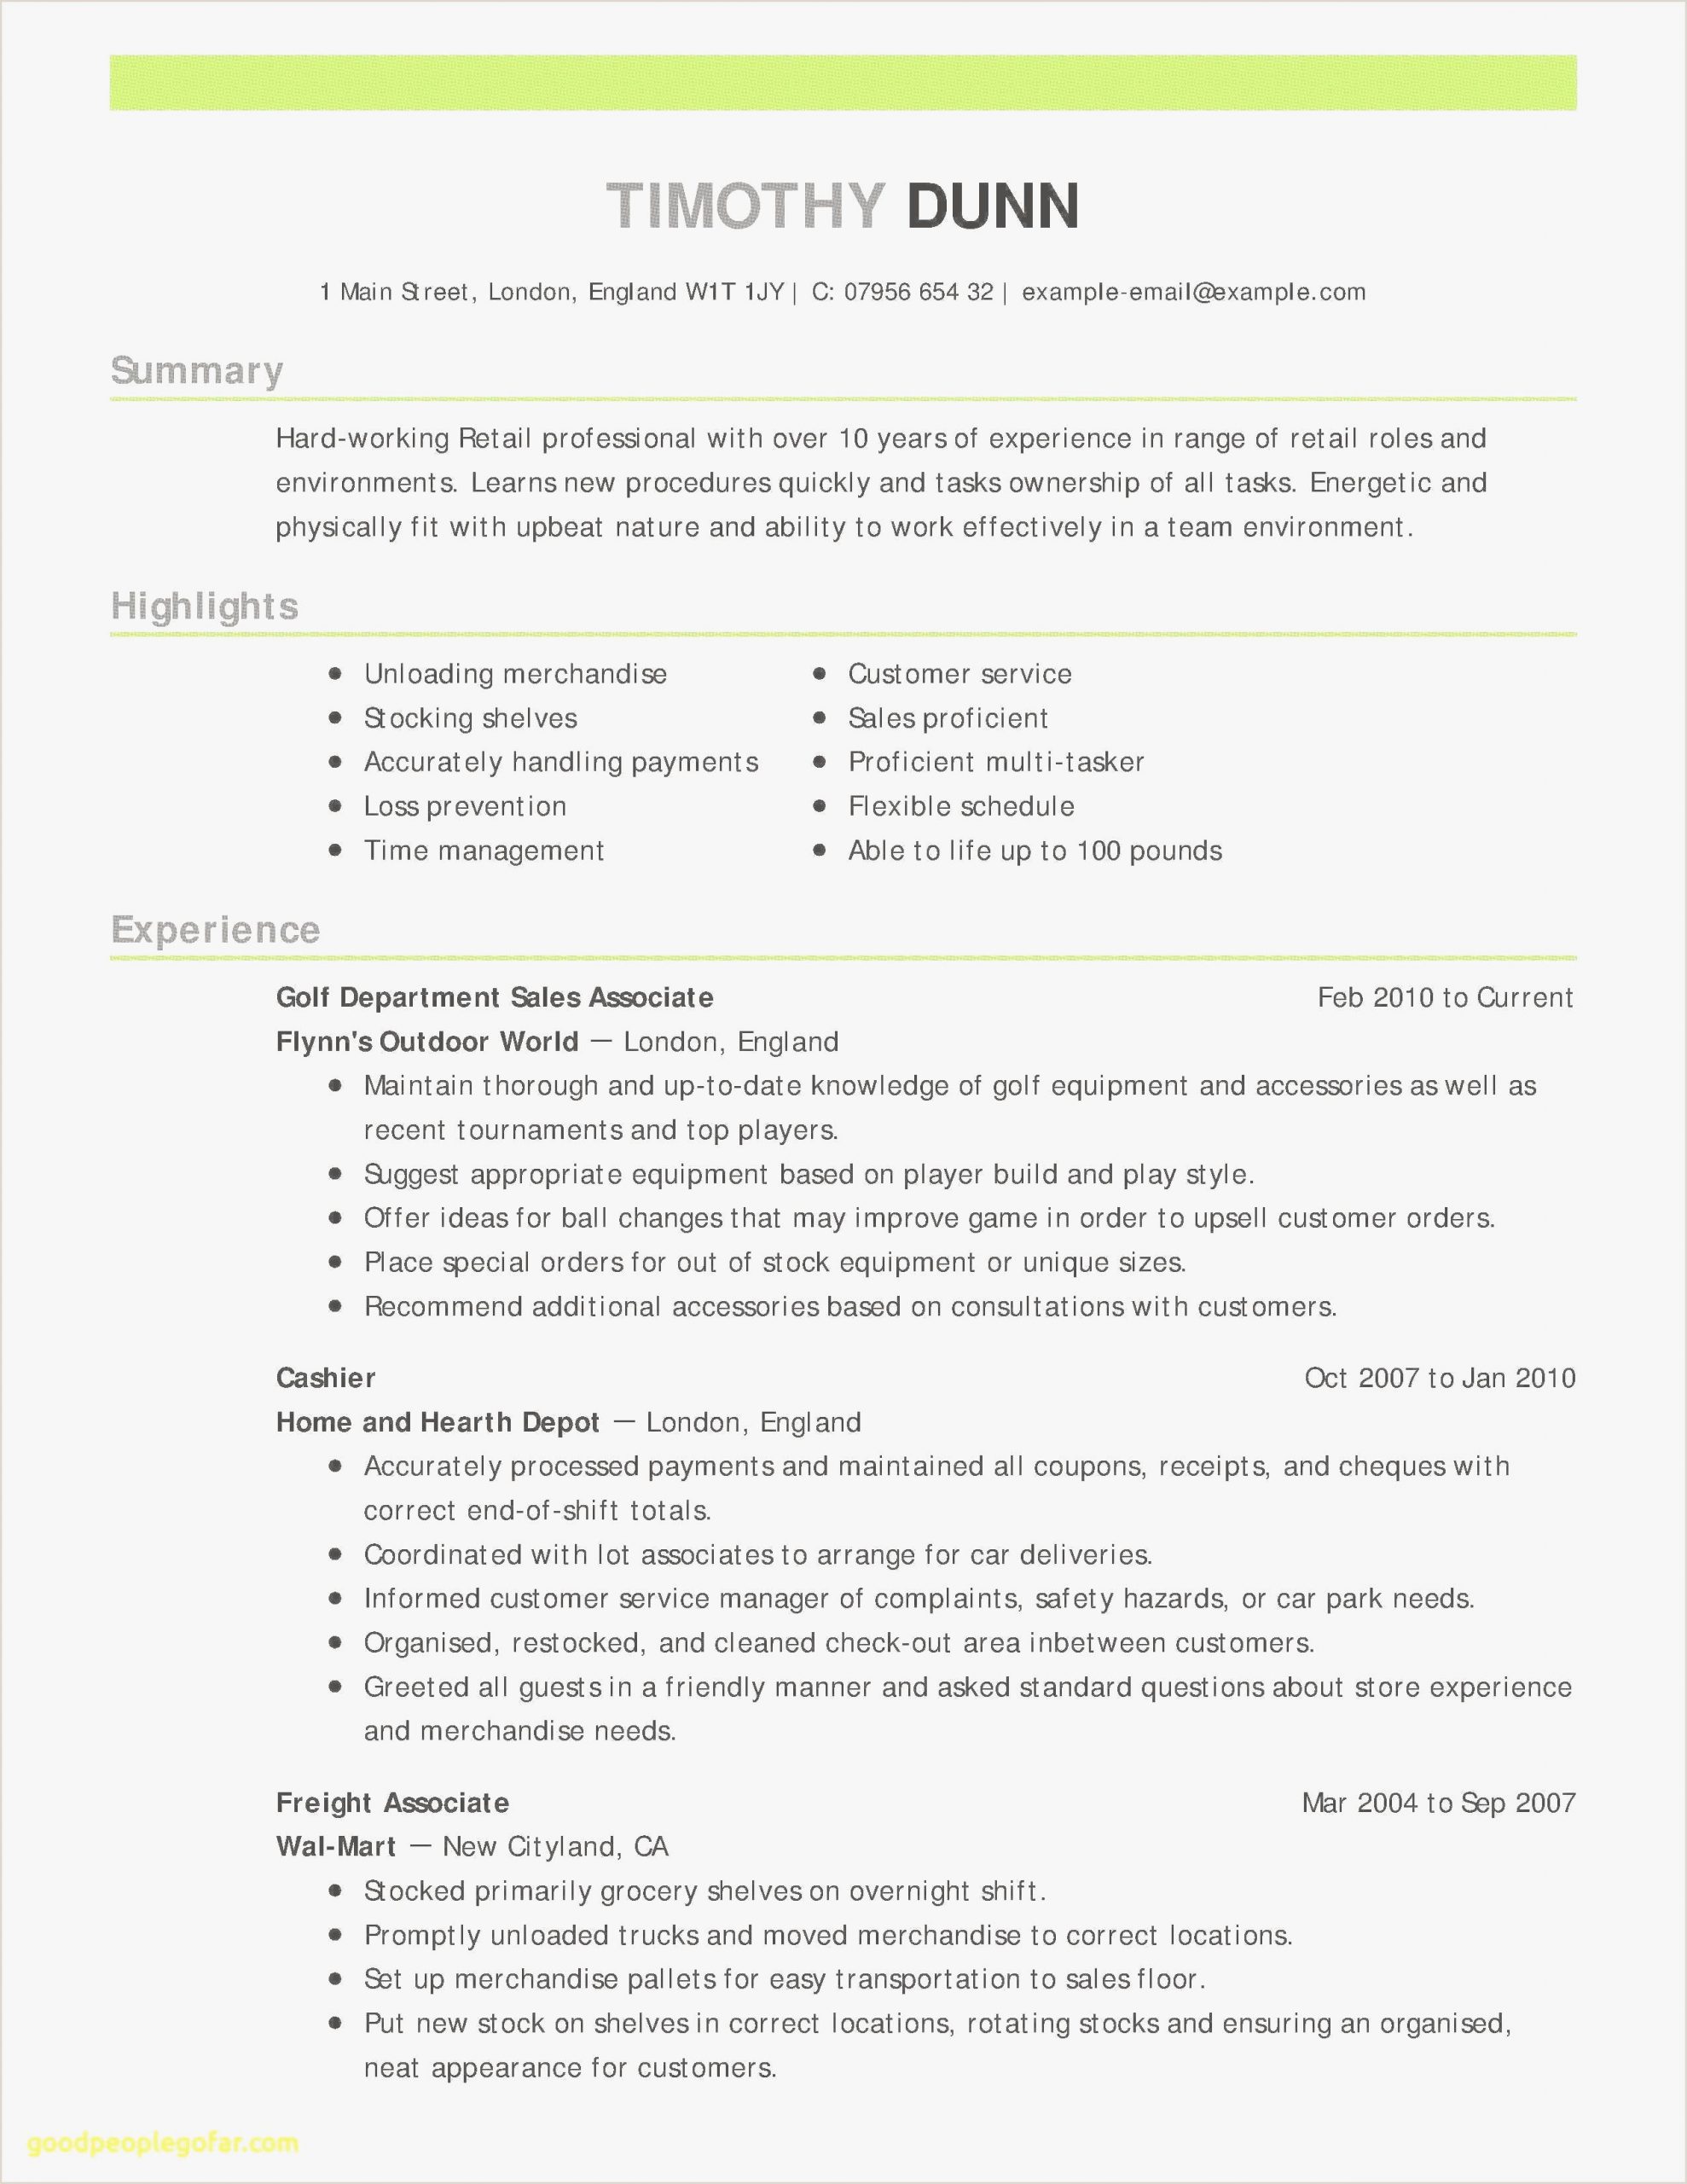 Home Depot Sales associate Resume Sample Professional Cv format Images Resume Examples, Resume Summary …